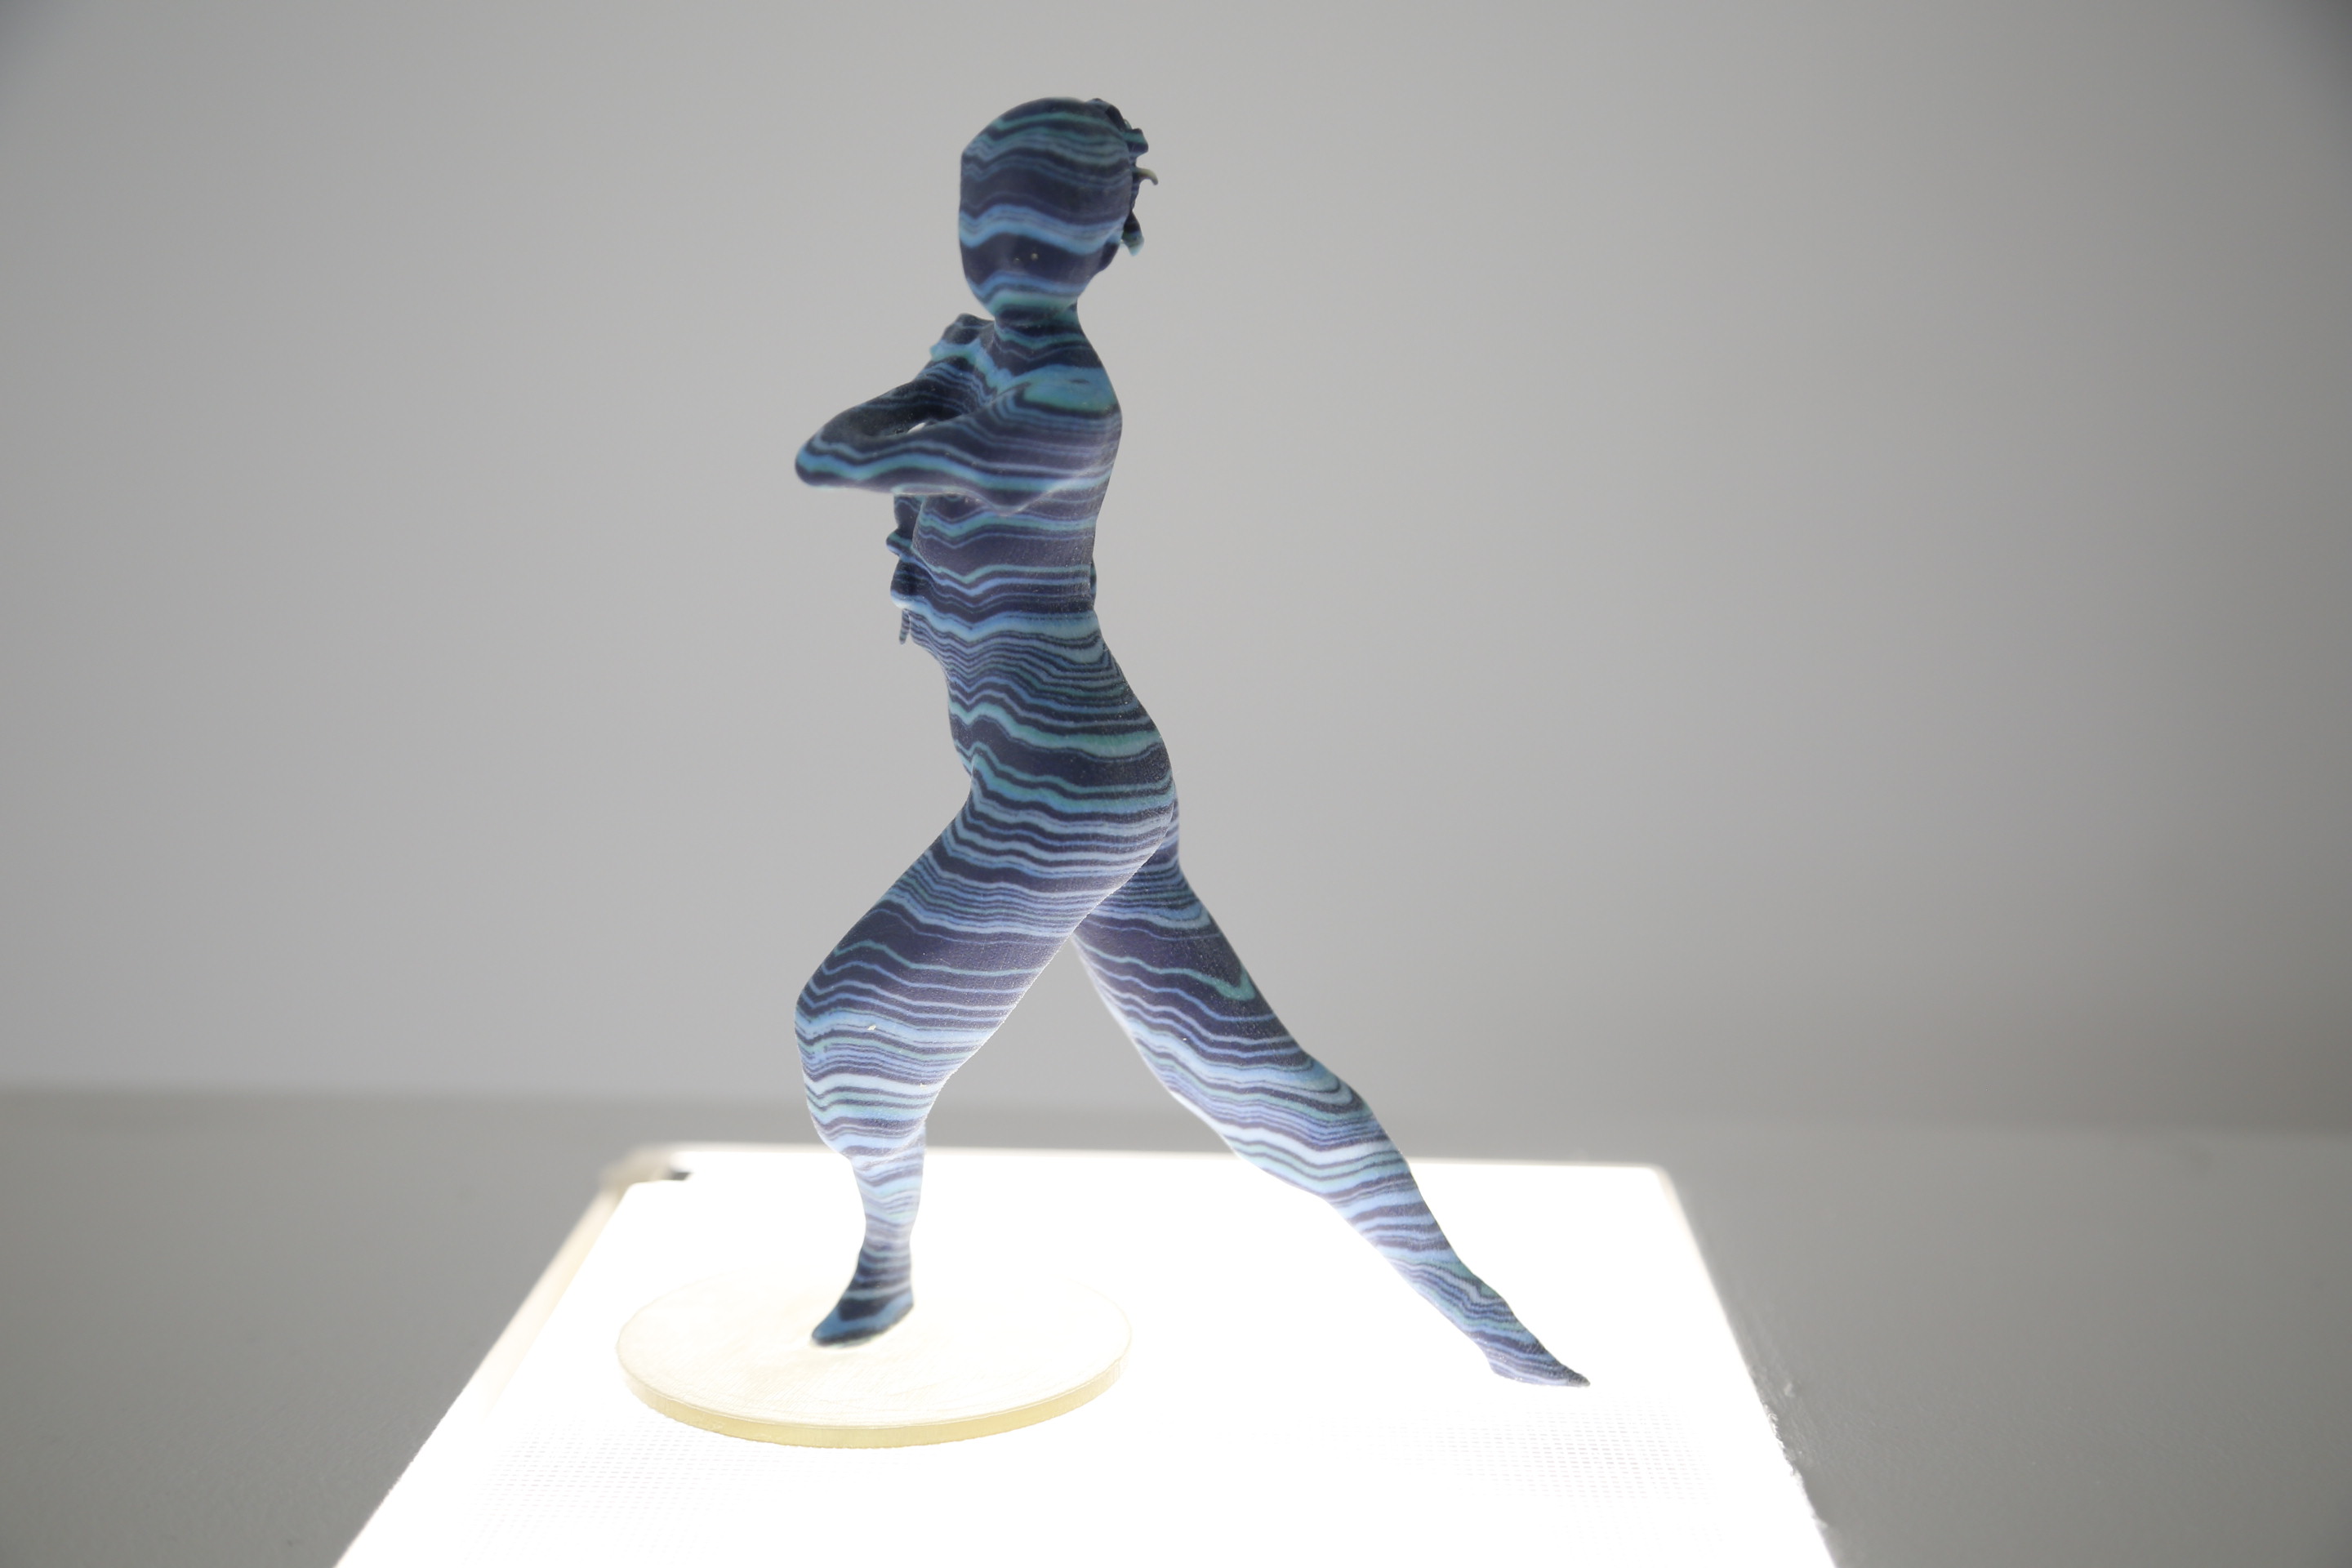 Through an interactive installation, users are exposed to a series of 3D printed sculptures of once-professional dancers and watch them come to life.